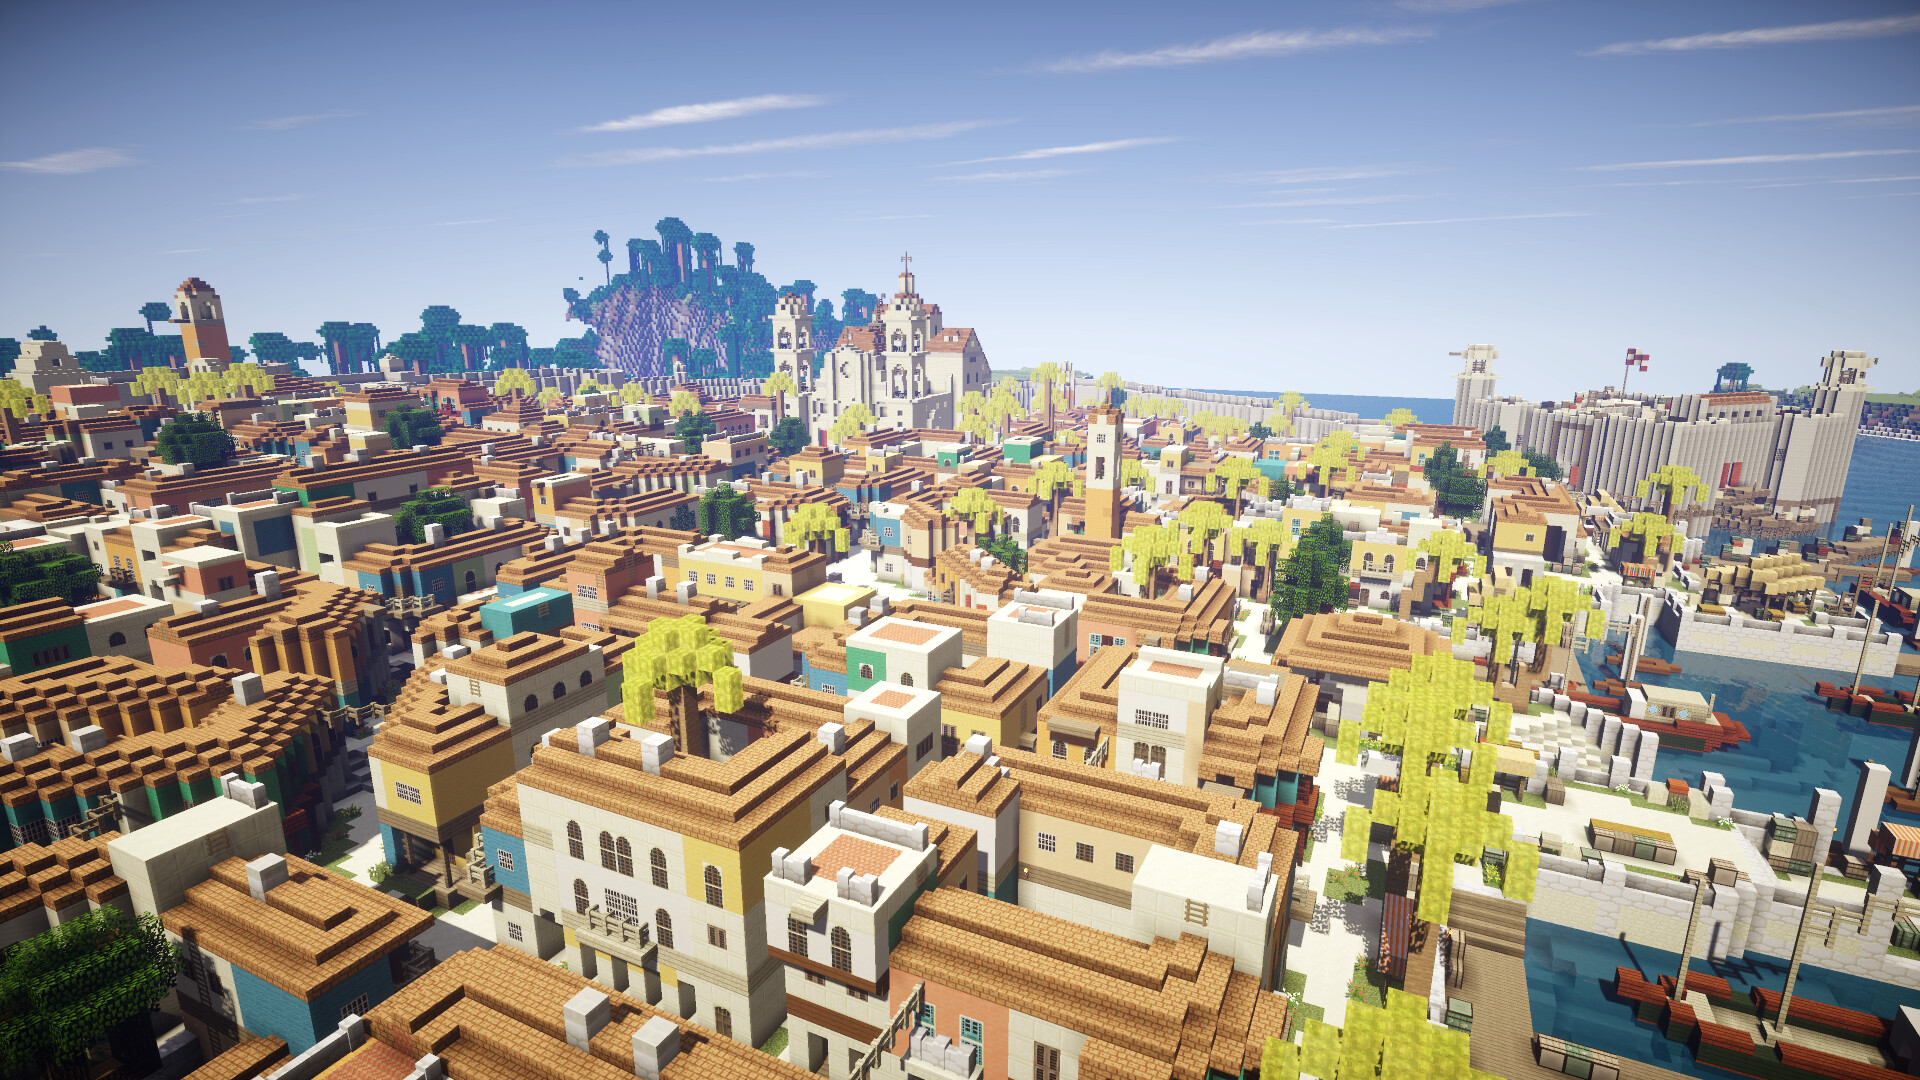 Assassin's Creed Revelations Constantinople Map for Minecraft